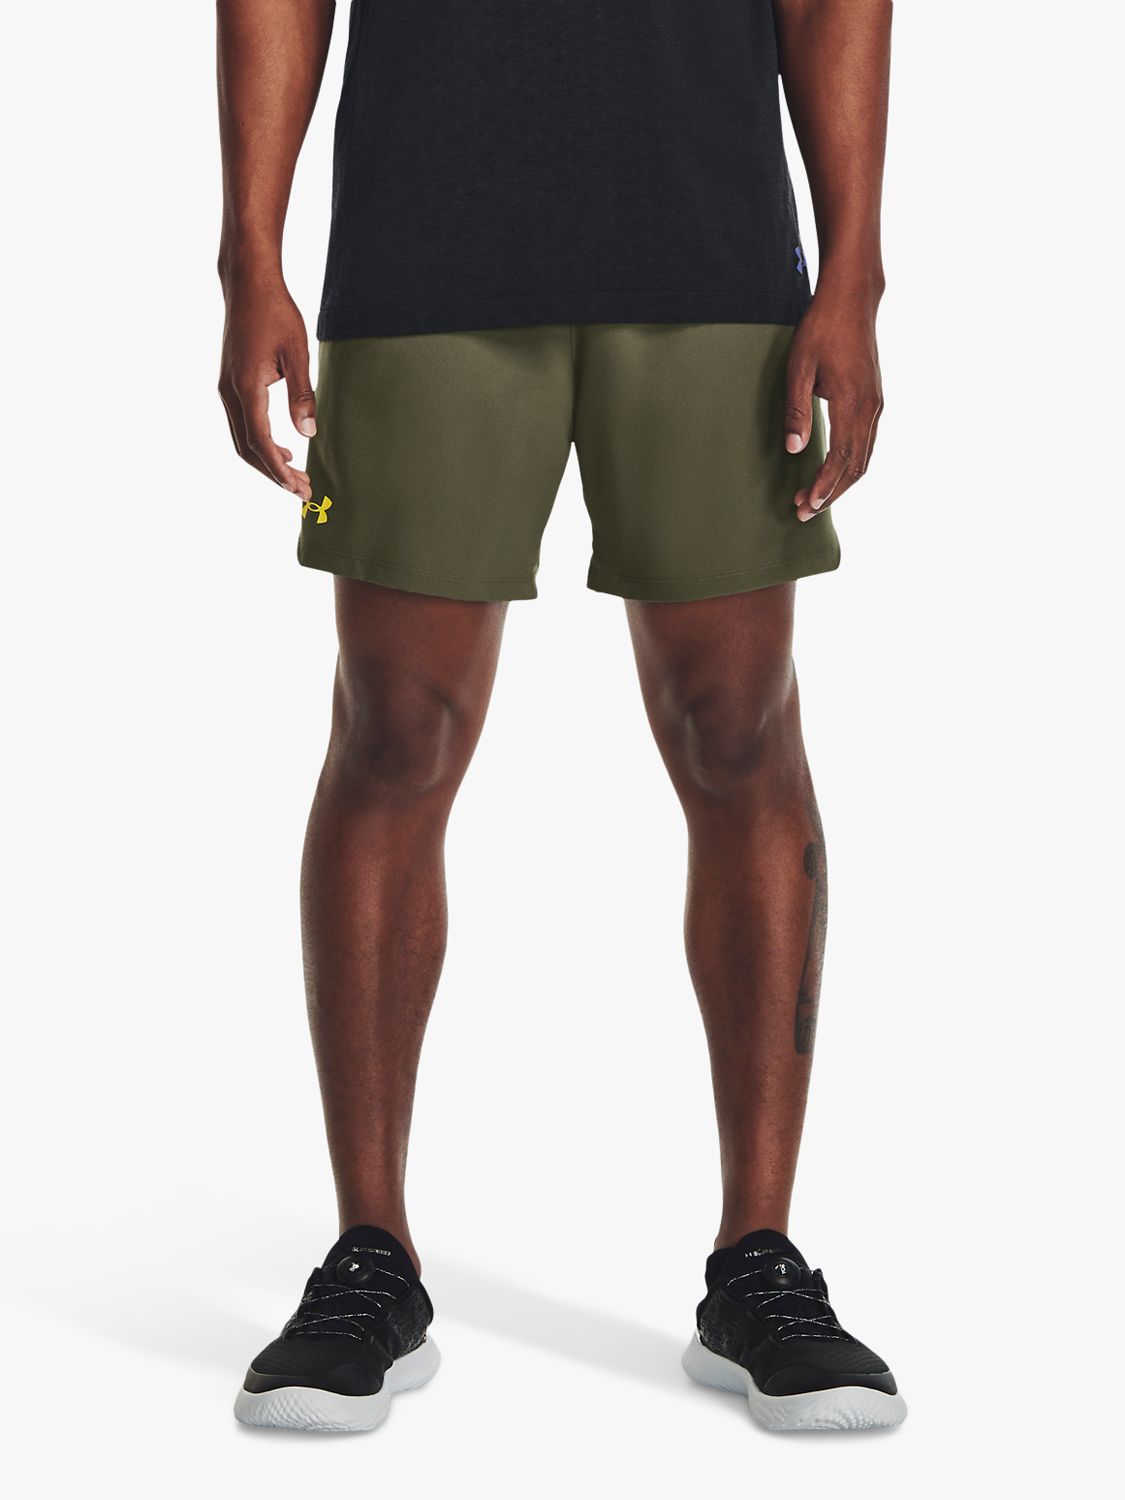 Under Armour Vanish Woven 6" Gym Shorts, Green/Limeyellow, L